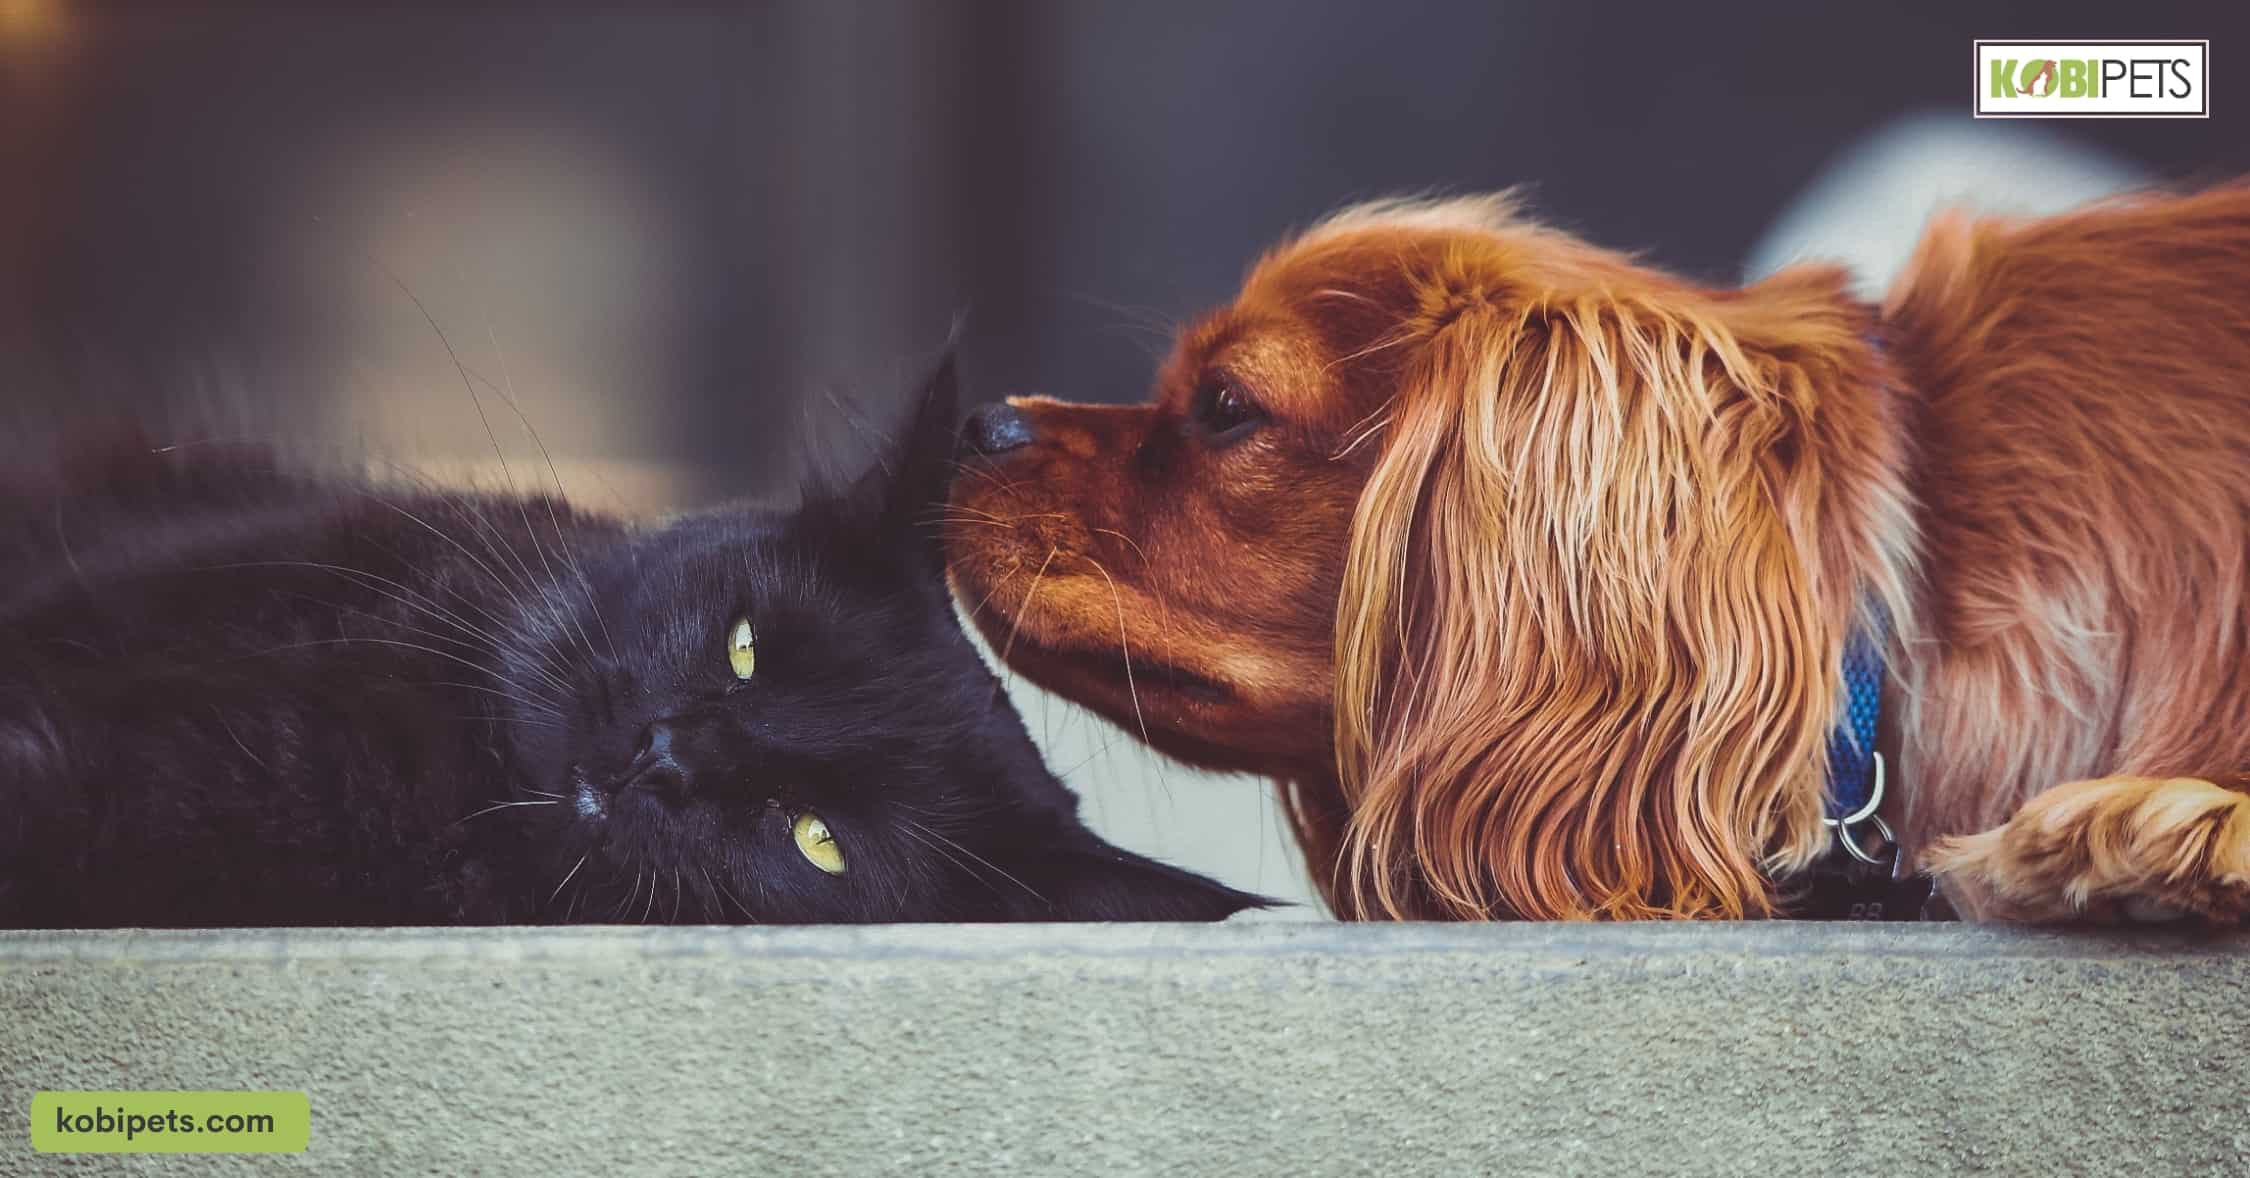 Emotional Intelligence in Dogs and Cats